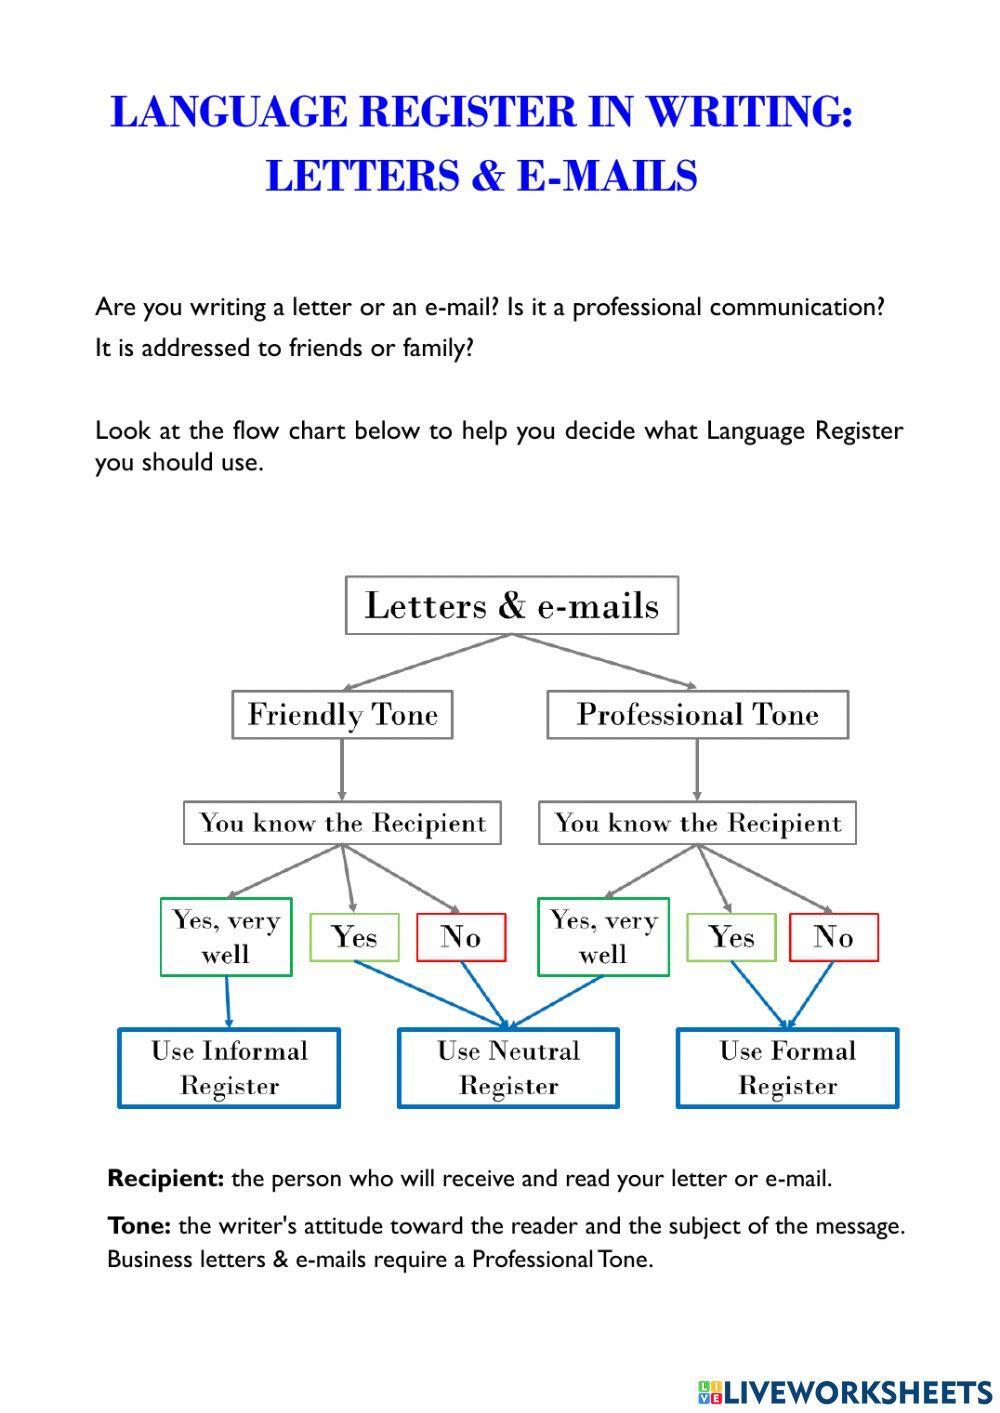 Language Register in Writing: Letters & e-mails